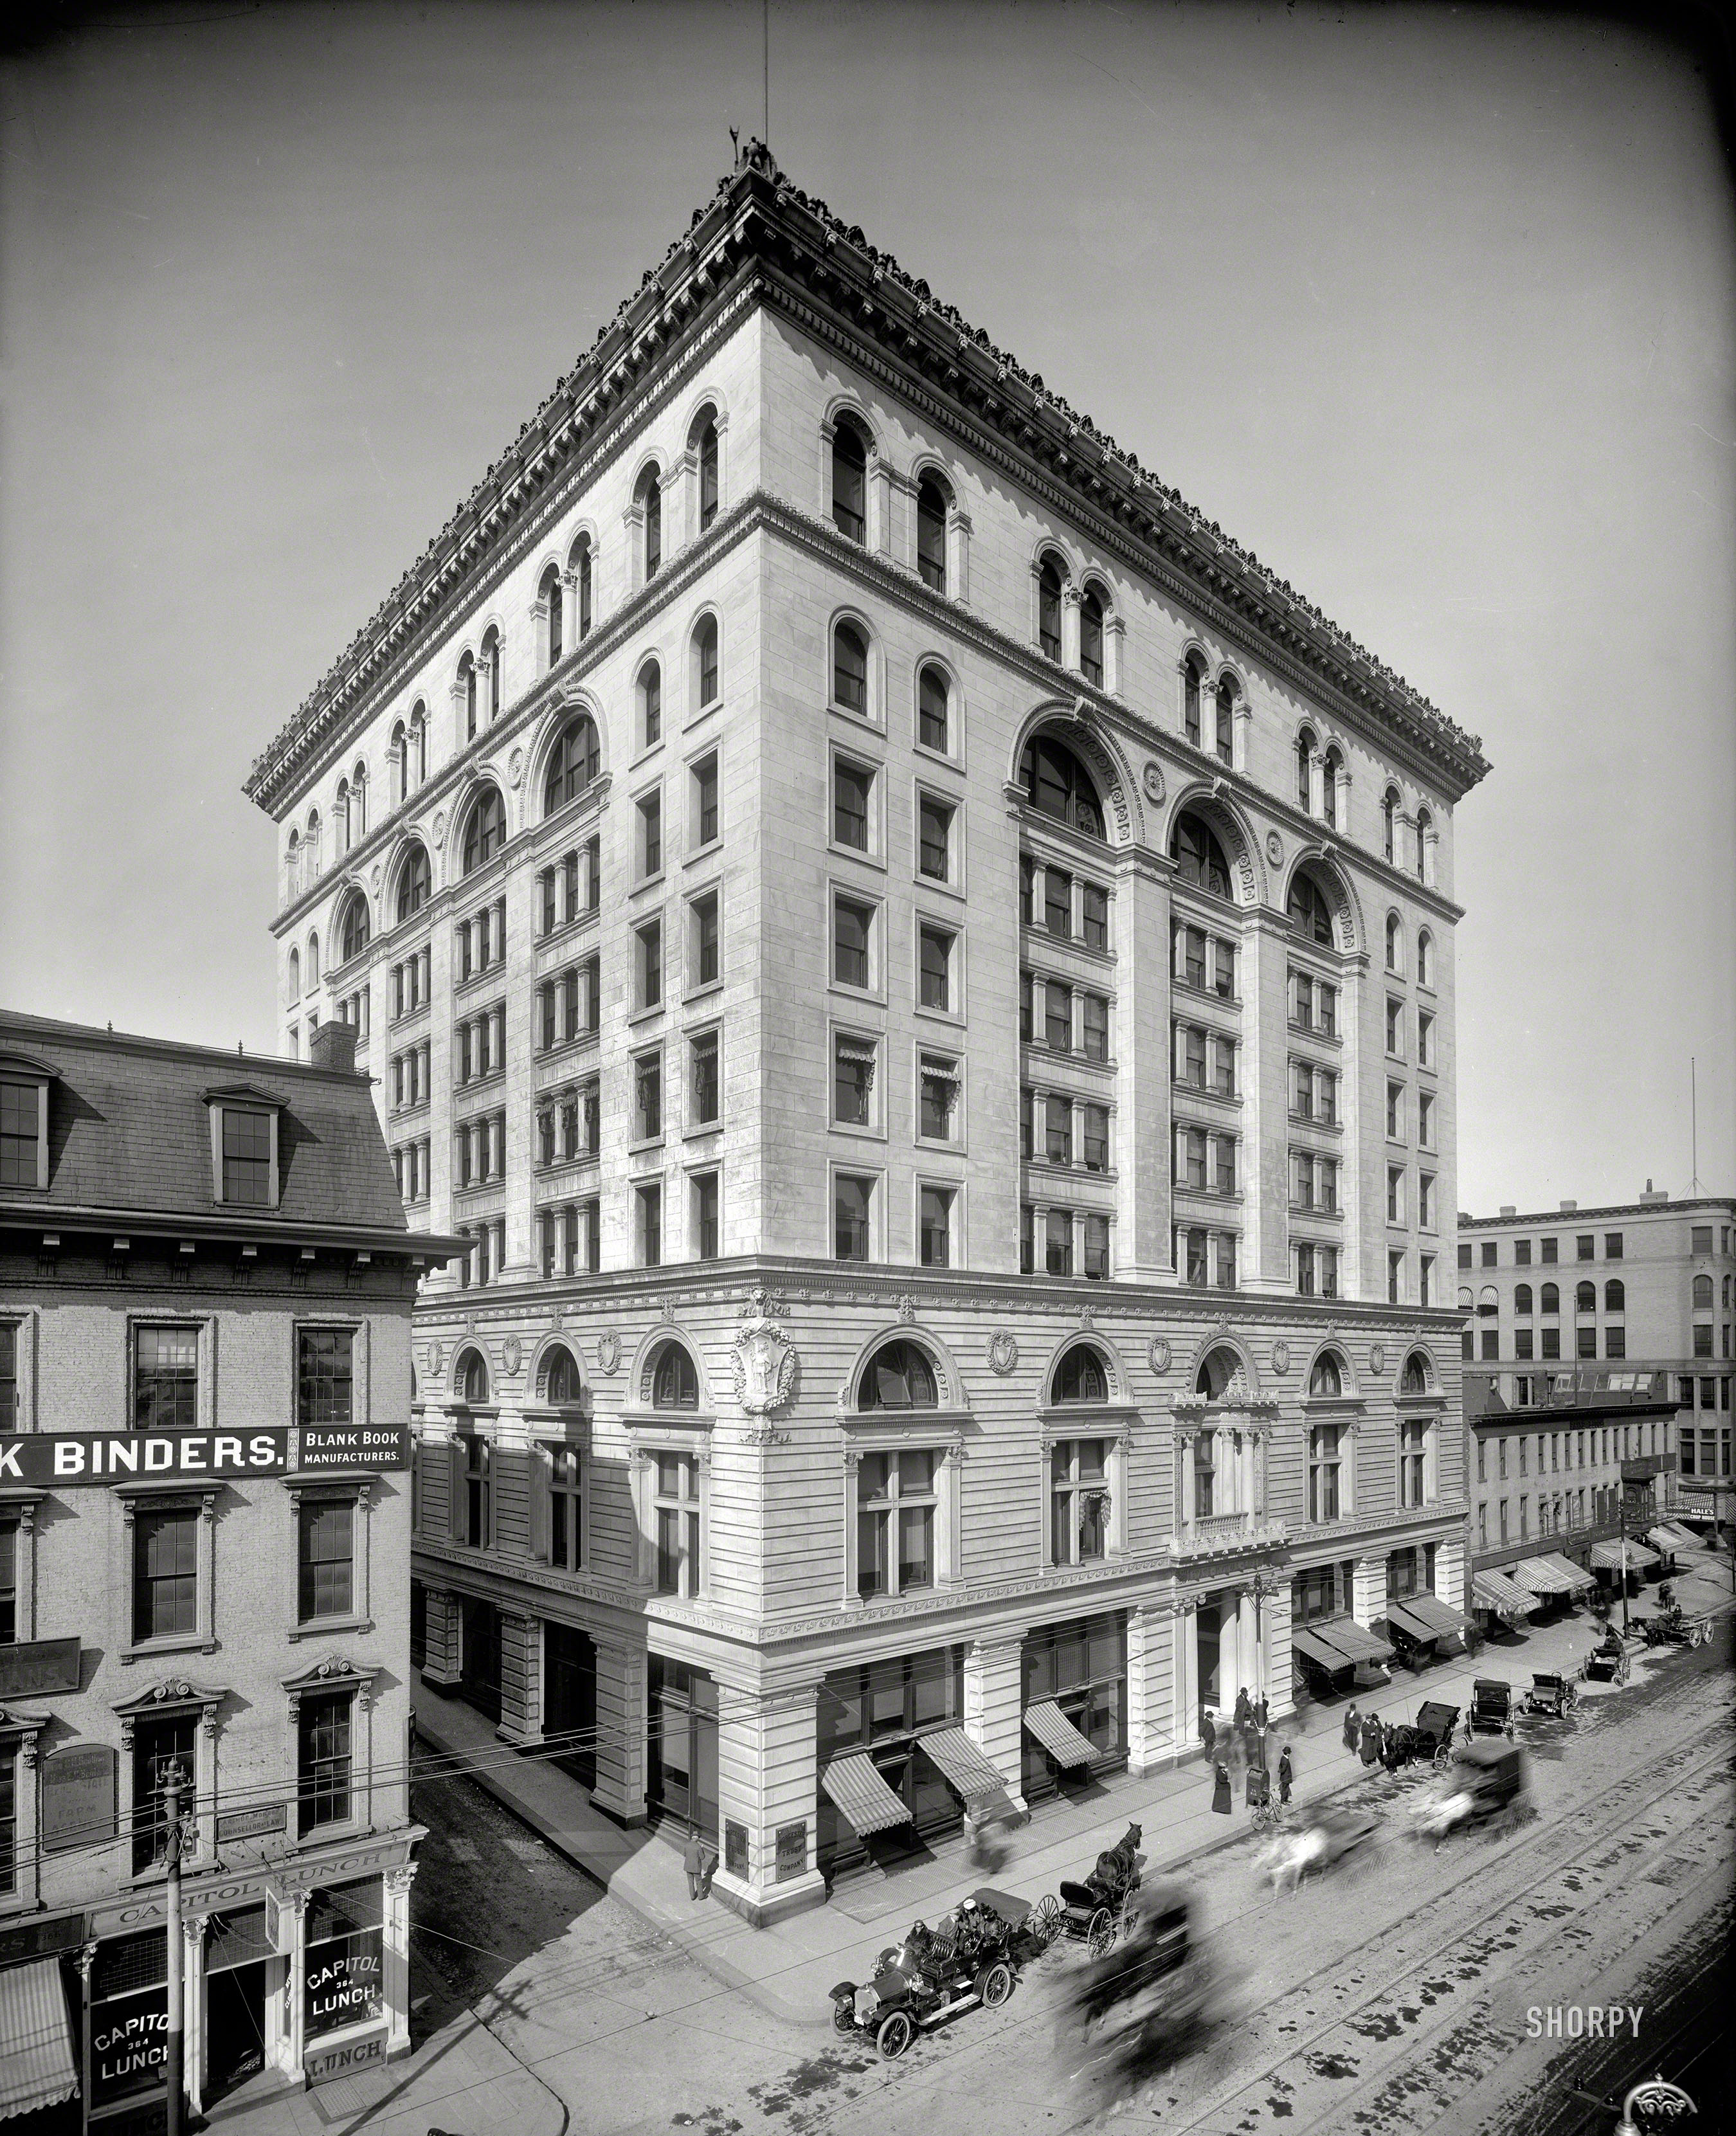 Circa 1908. "State Mutual Building, Worcester, Massachusetts." An 1897 Renaissance Revival confection seen in one of the surreal diagonal perspectives much loved by Detroit Publishing. 8x10 inch glass negative. View full size.